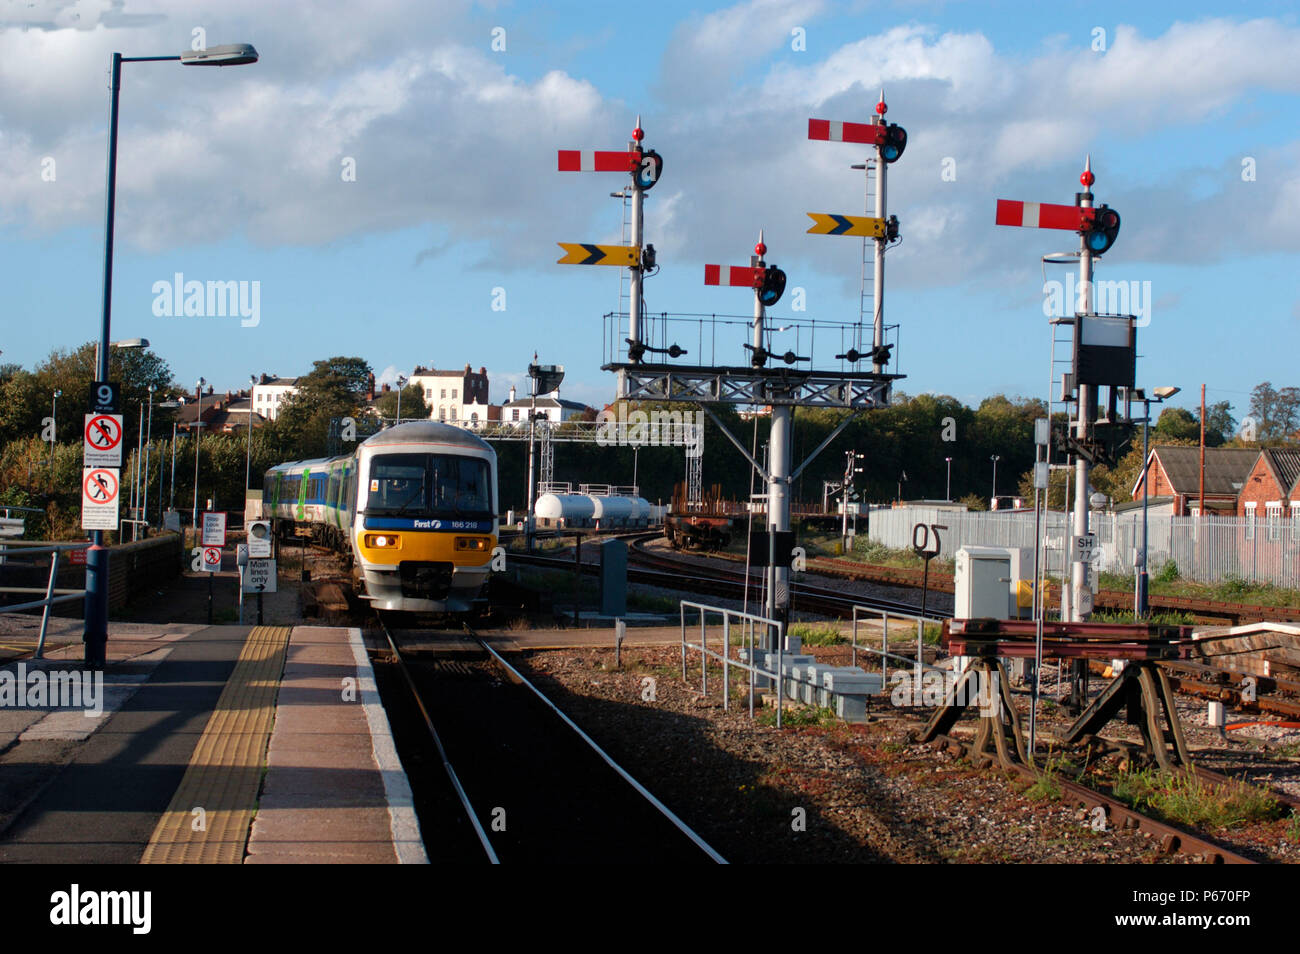 The Great Western Railway, September 2004. Semaphore signals at Worcester Station. Stock Photo